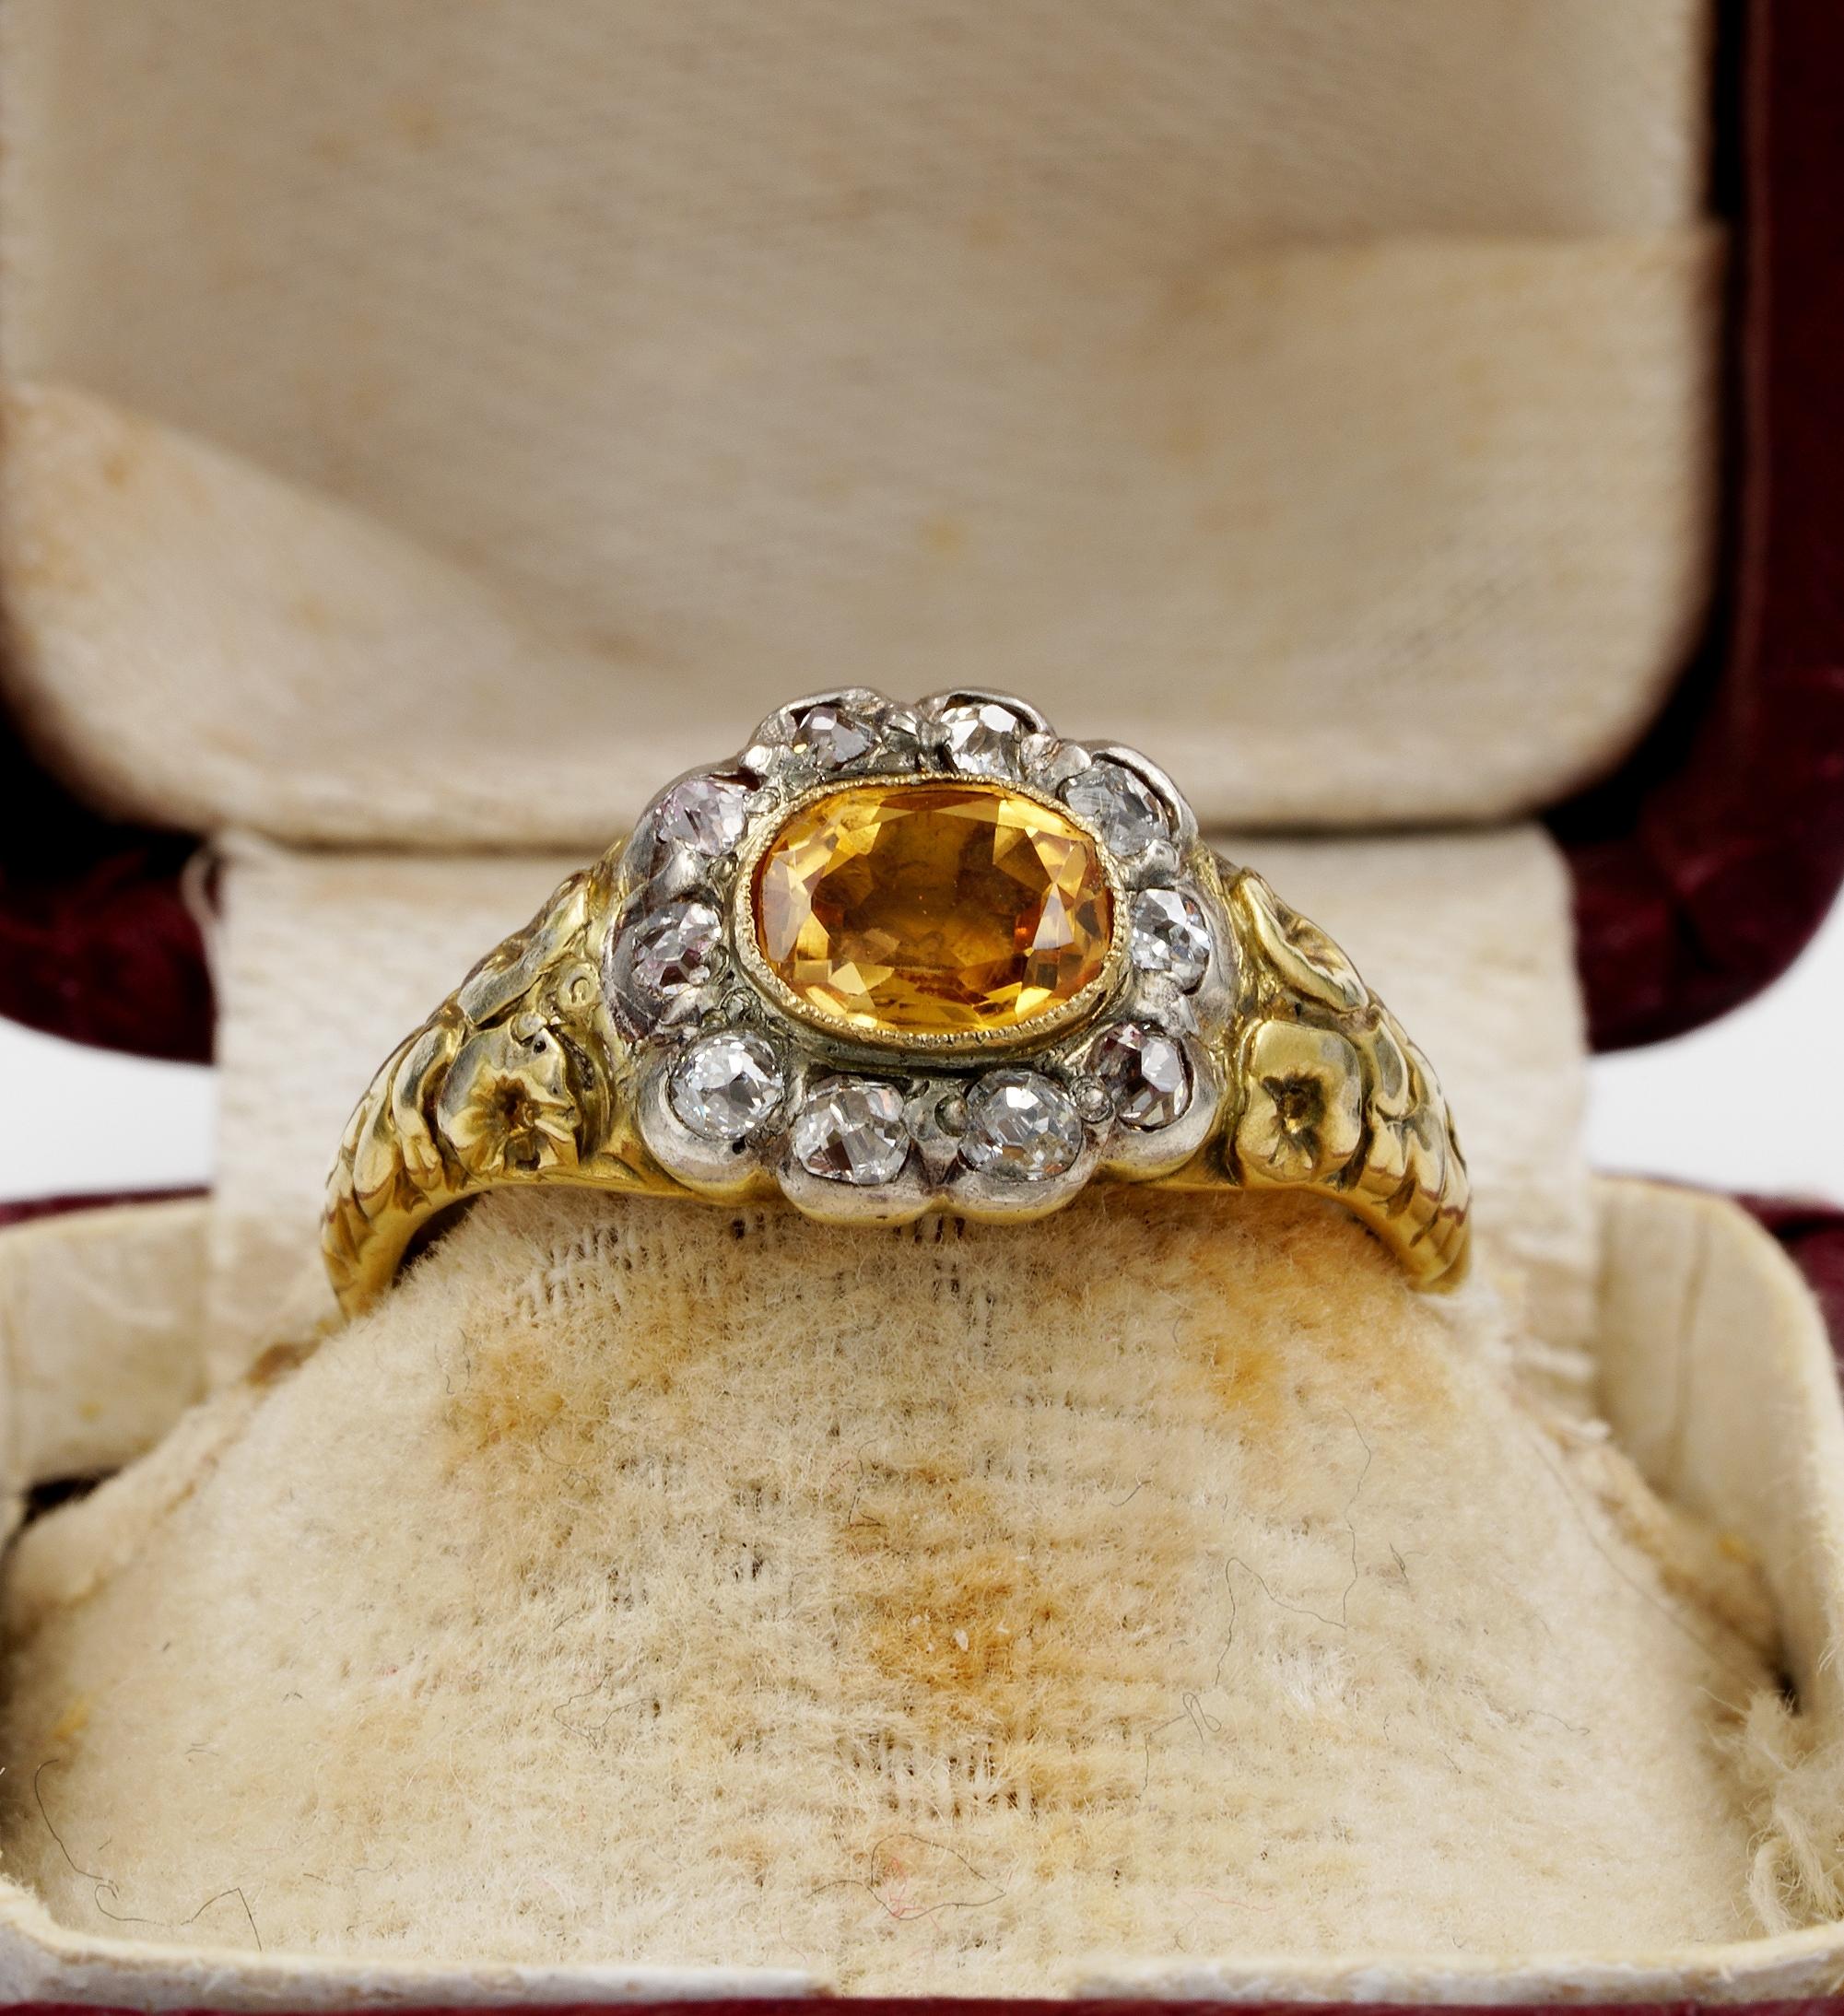 Imperial Topaz Magic Allure
Imperial topaz is also known as “precious topaz”. It is the most sought after natural topaz
Considered to be the colour of the setting sun, imperial topaz gets its name from the Russian Tsars of the 17th century
This